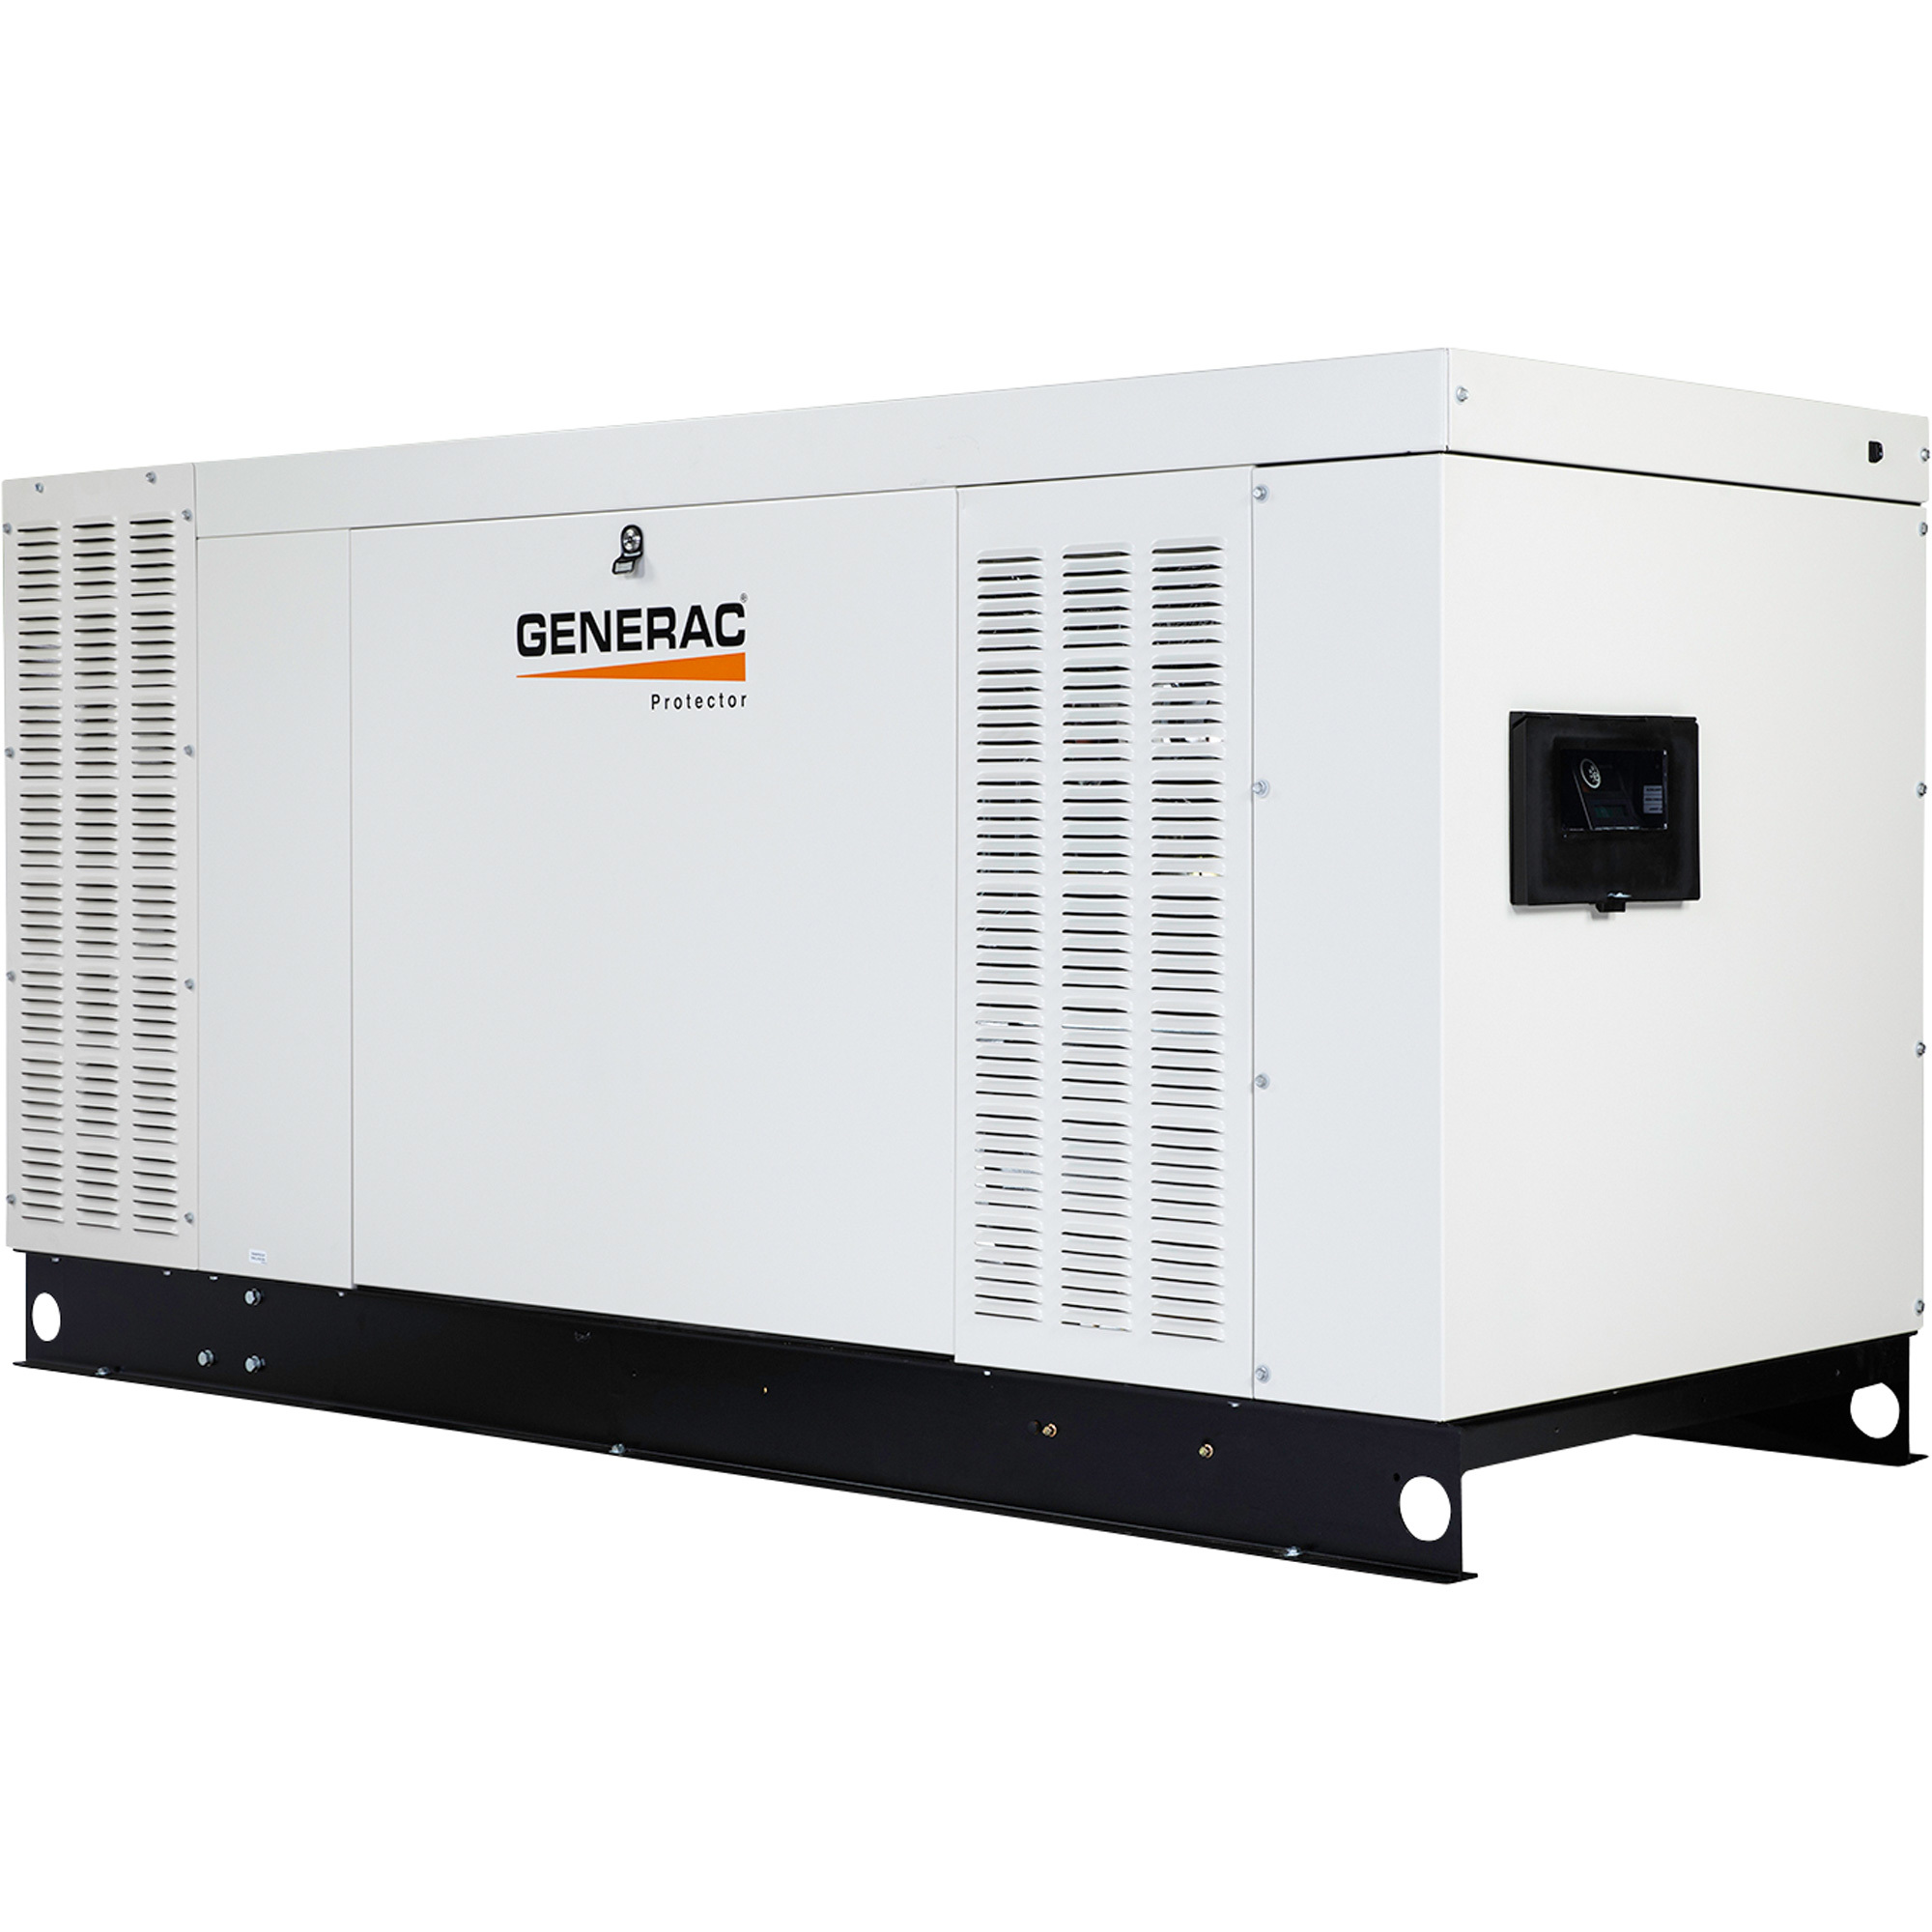 Generac Protector Series Home Standby Generator 60kW, LP/NG, 120/240 Volts, Single Phase, CARB Compliant